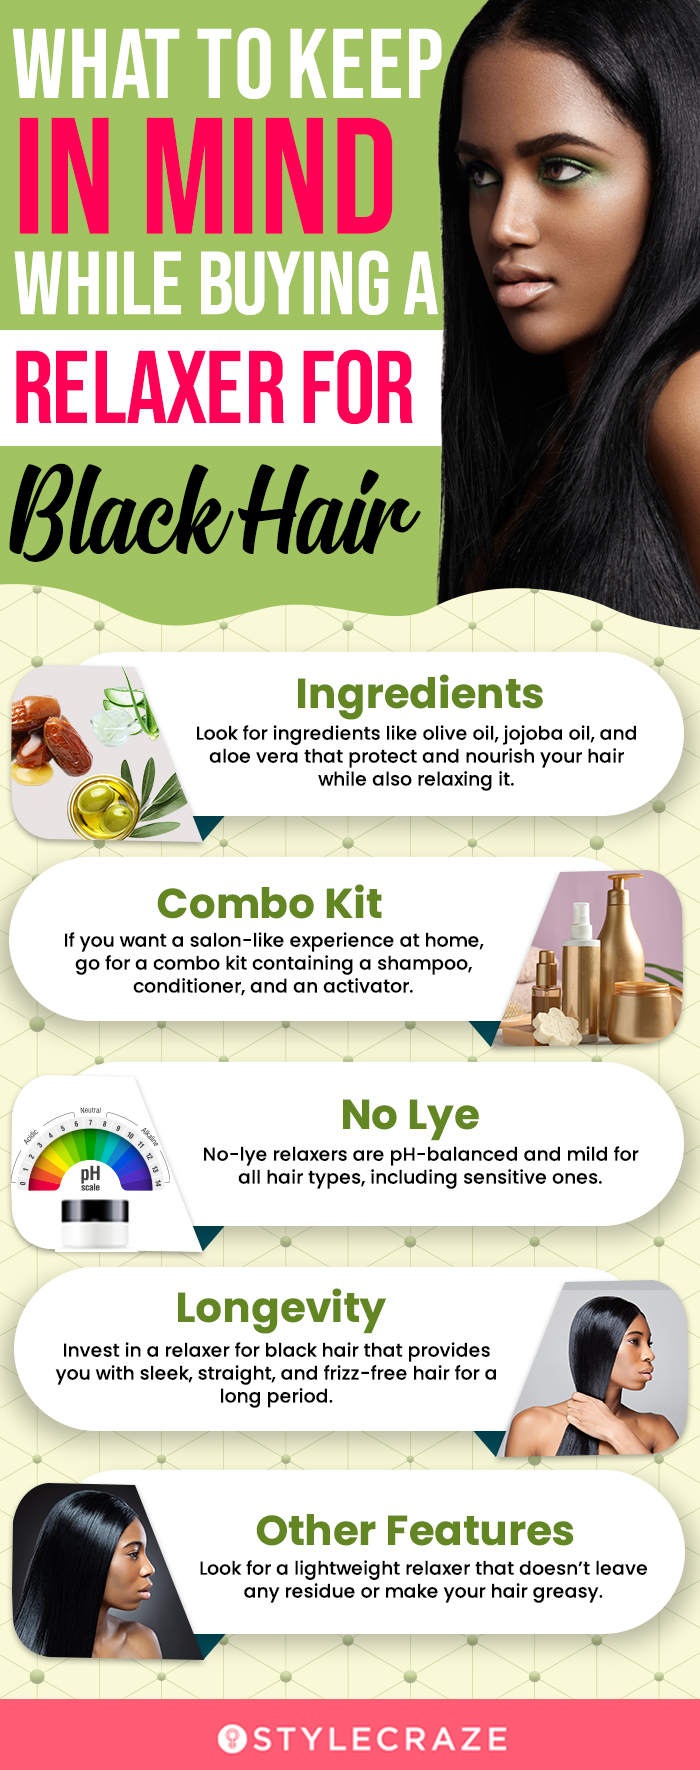 What To Keep In Mind While Buying Relaxer For Black Hair  [infographic]